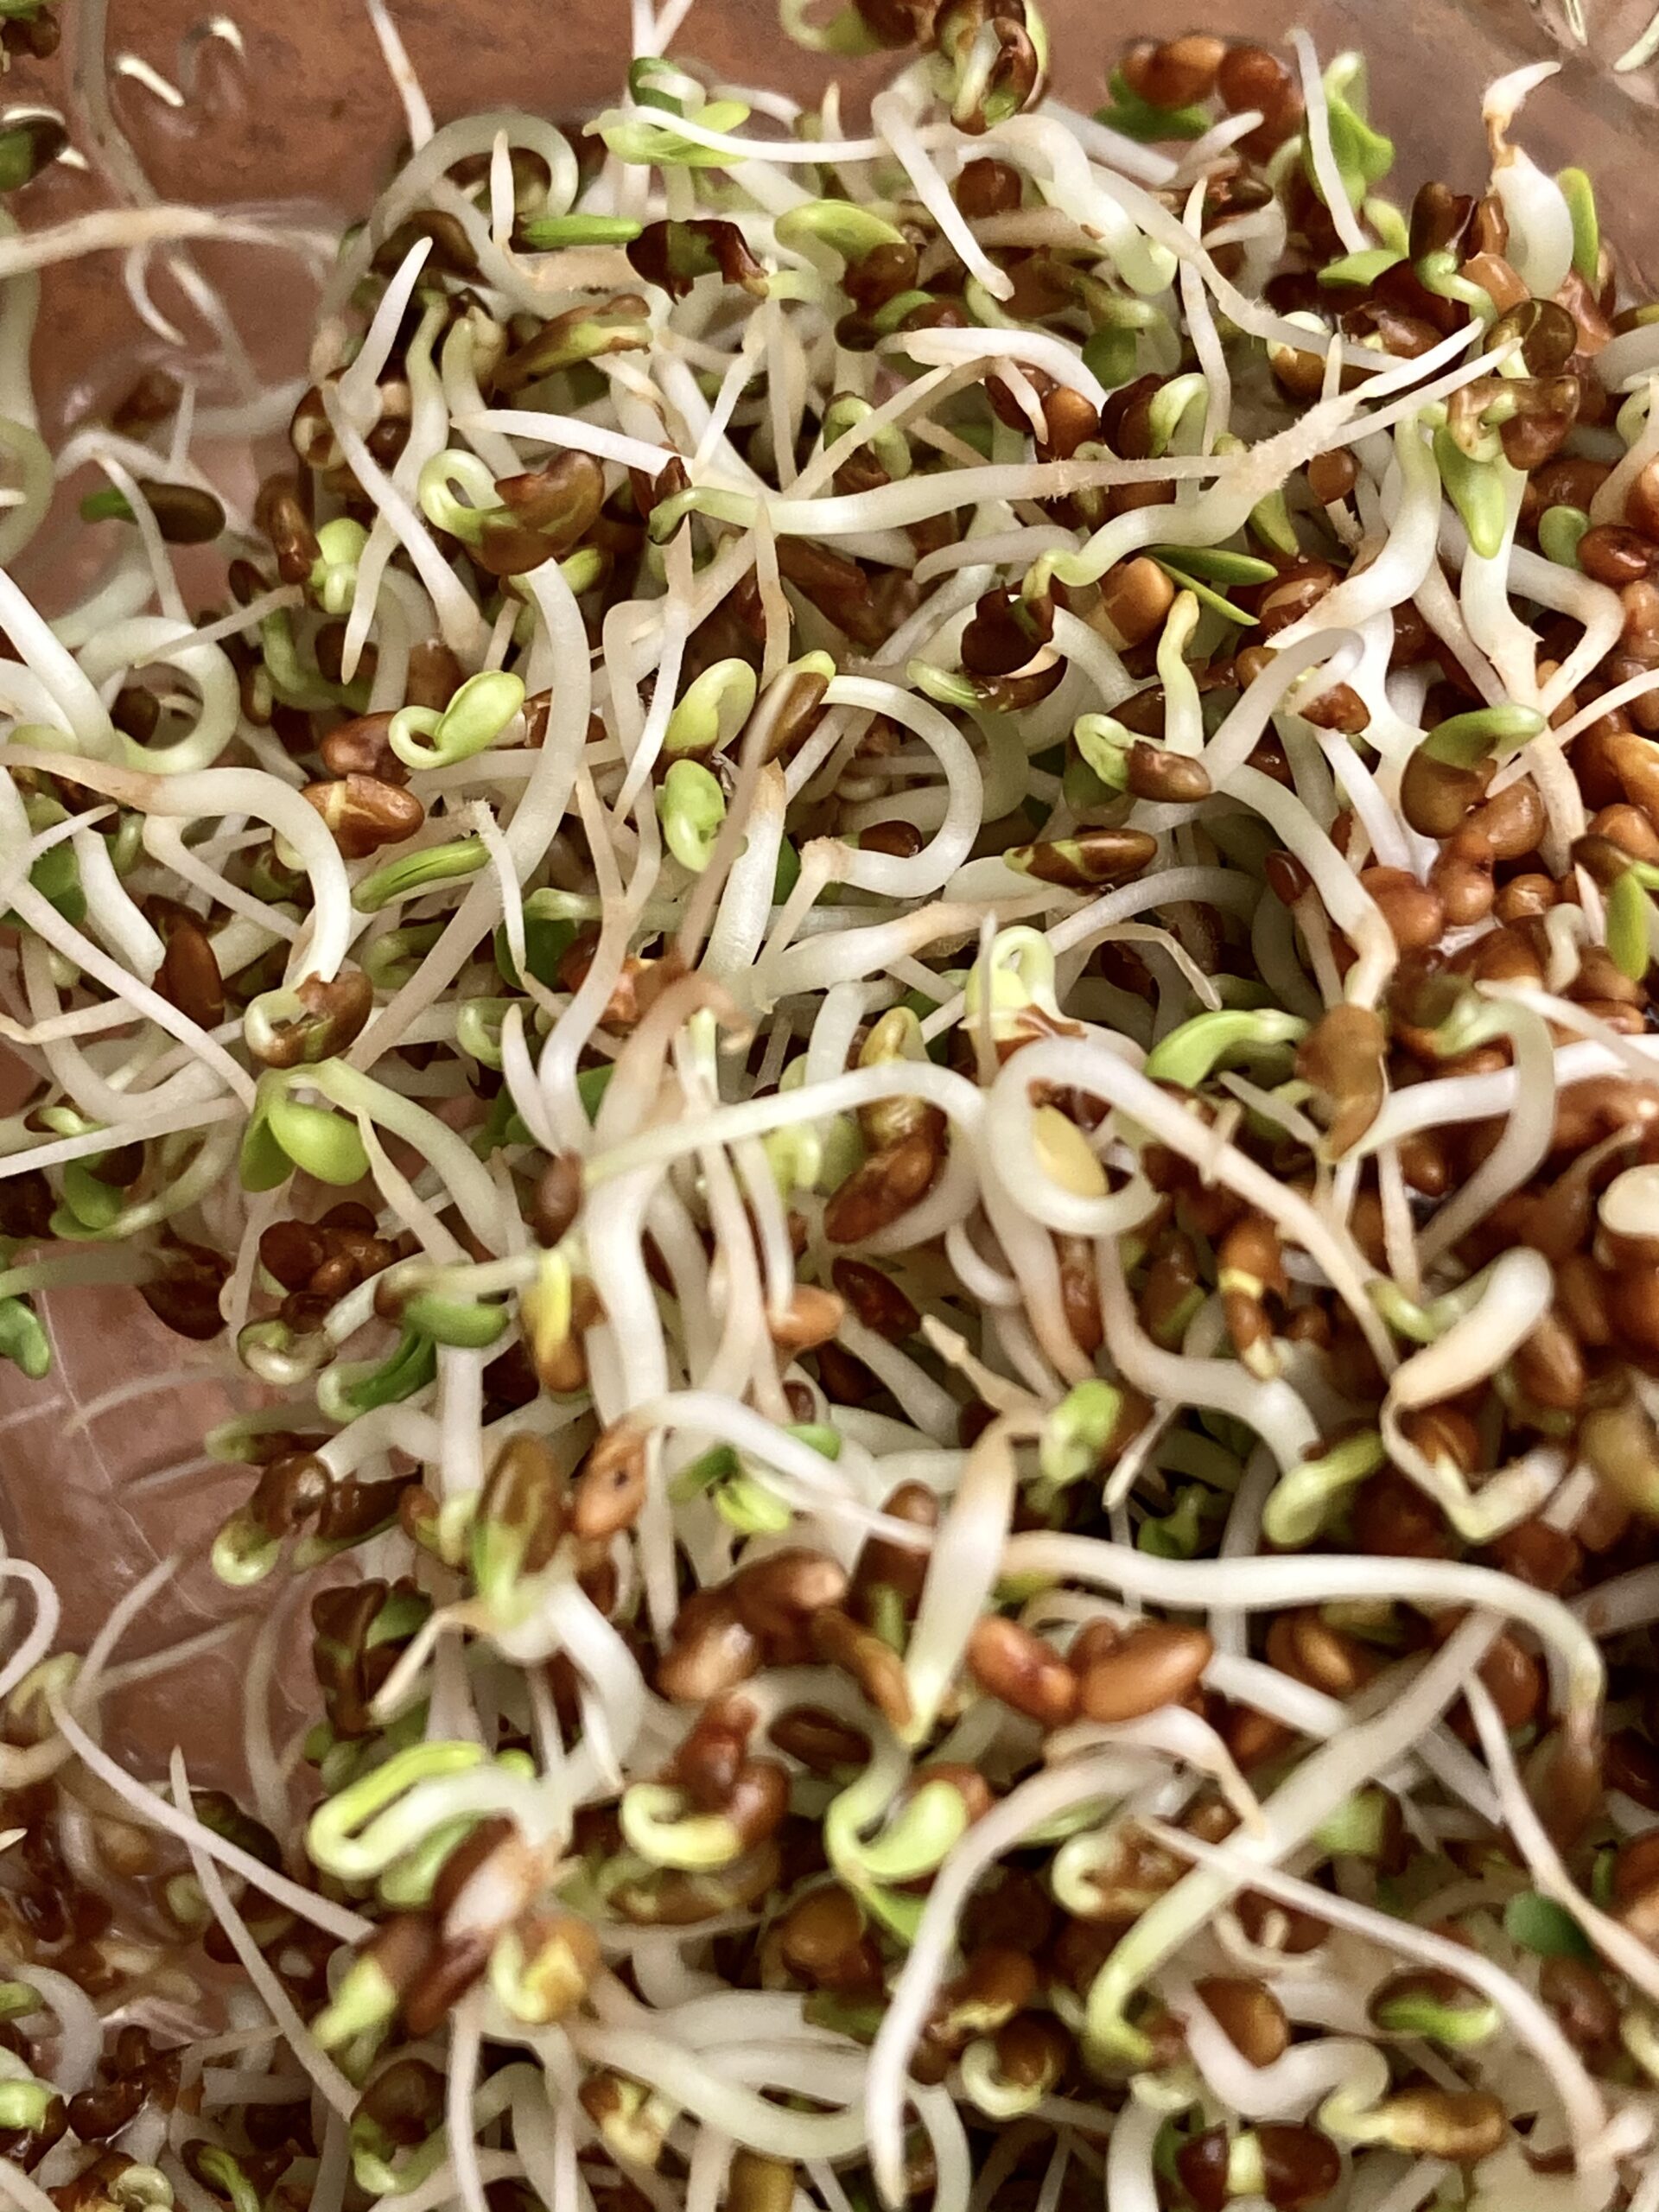 Alfalfa Sprouts. How to grow alfalfa Sprouts.